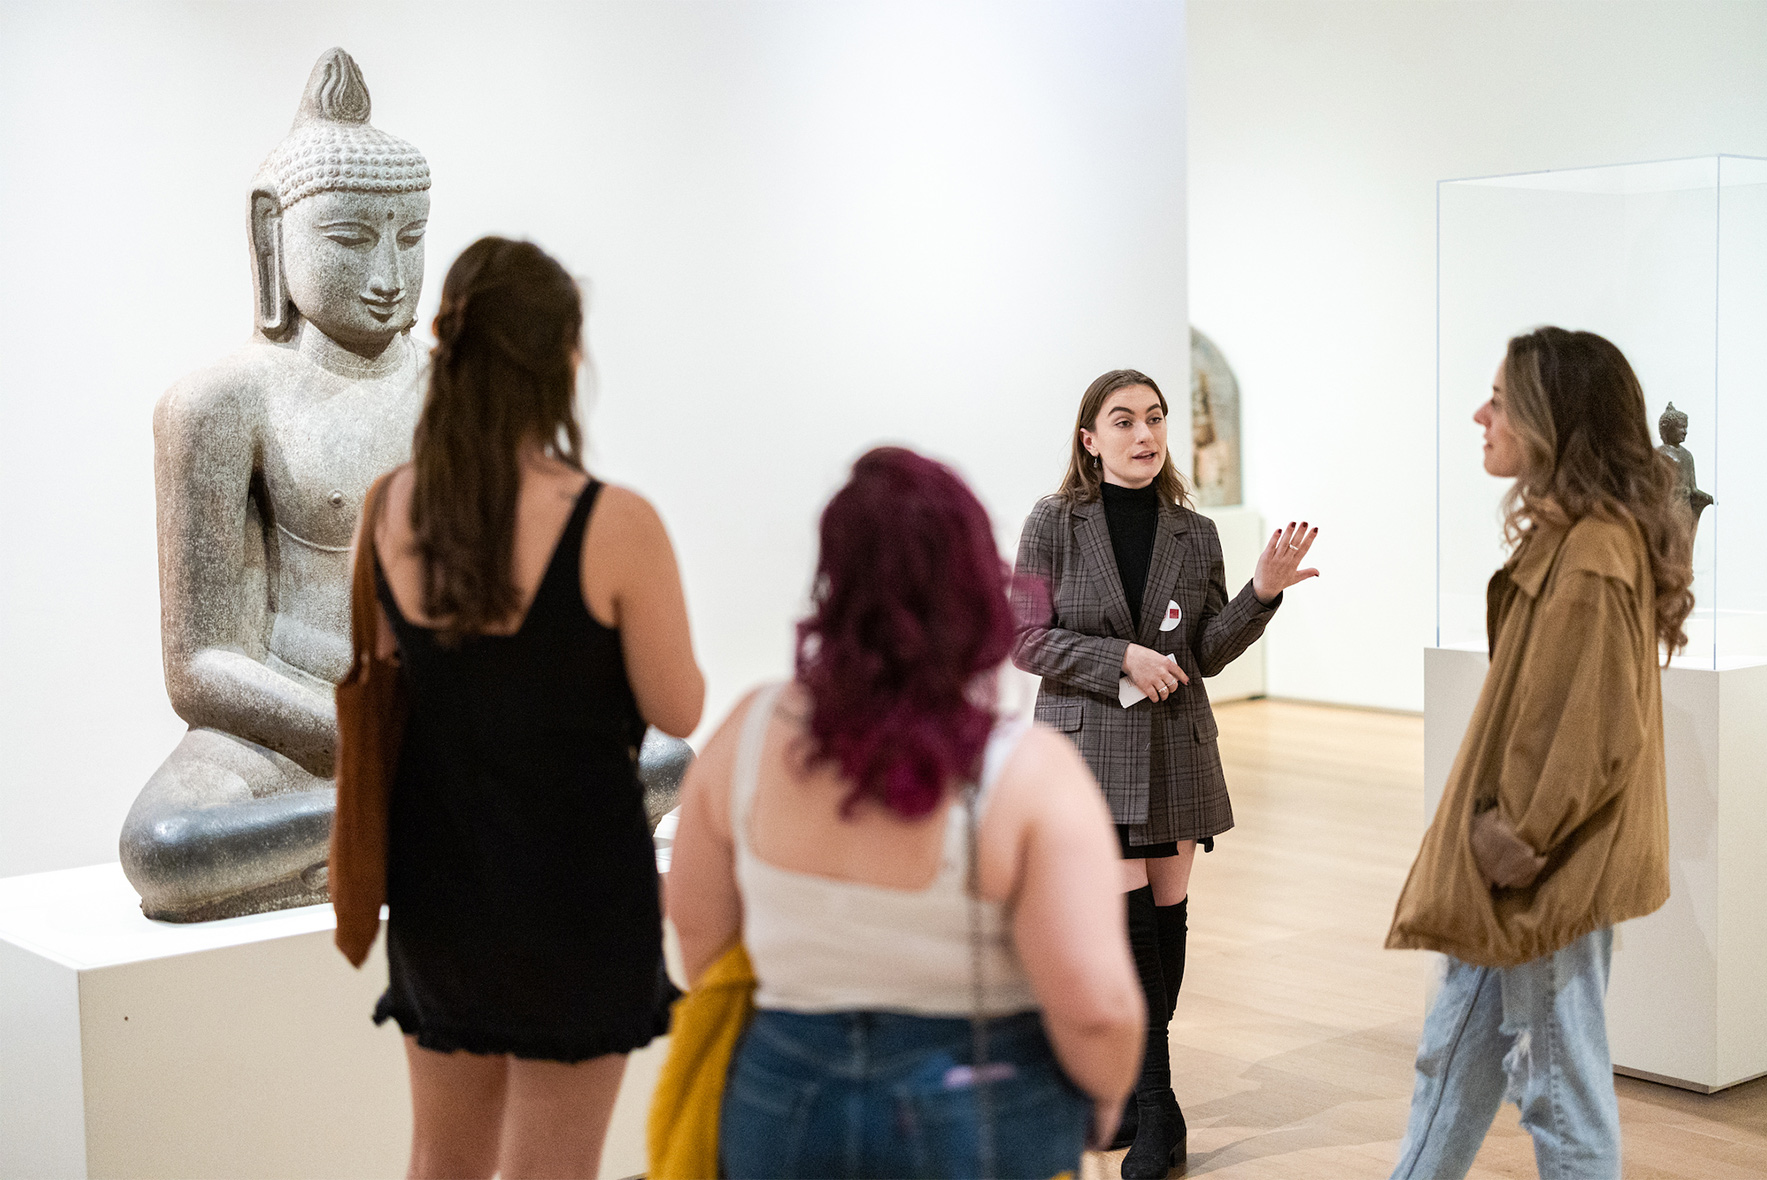 Loyola School of Education students tour the Art Institute of Chicago